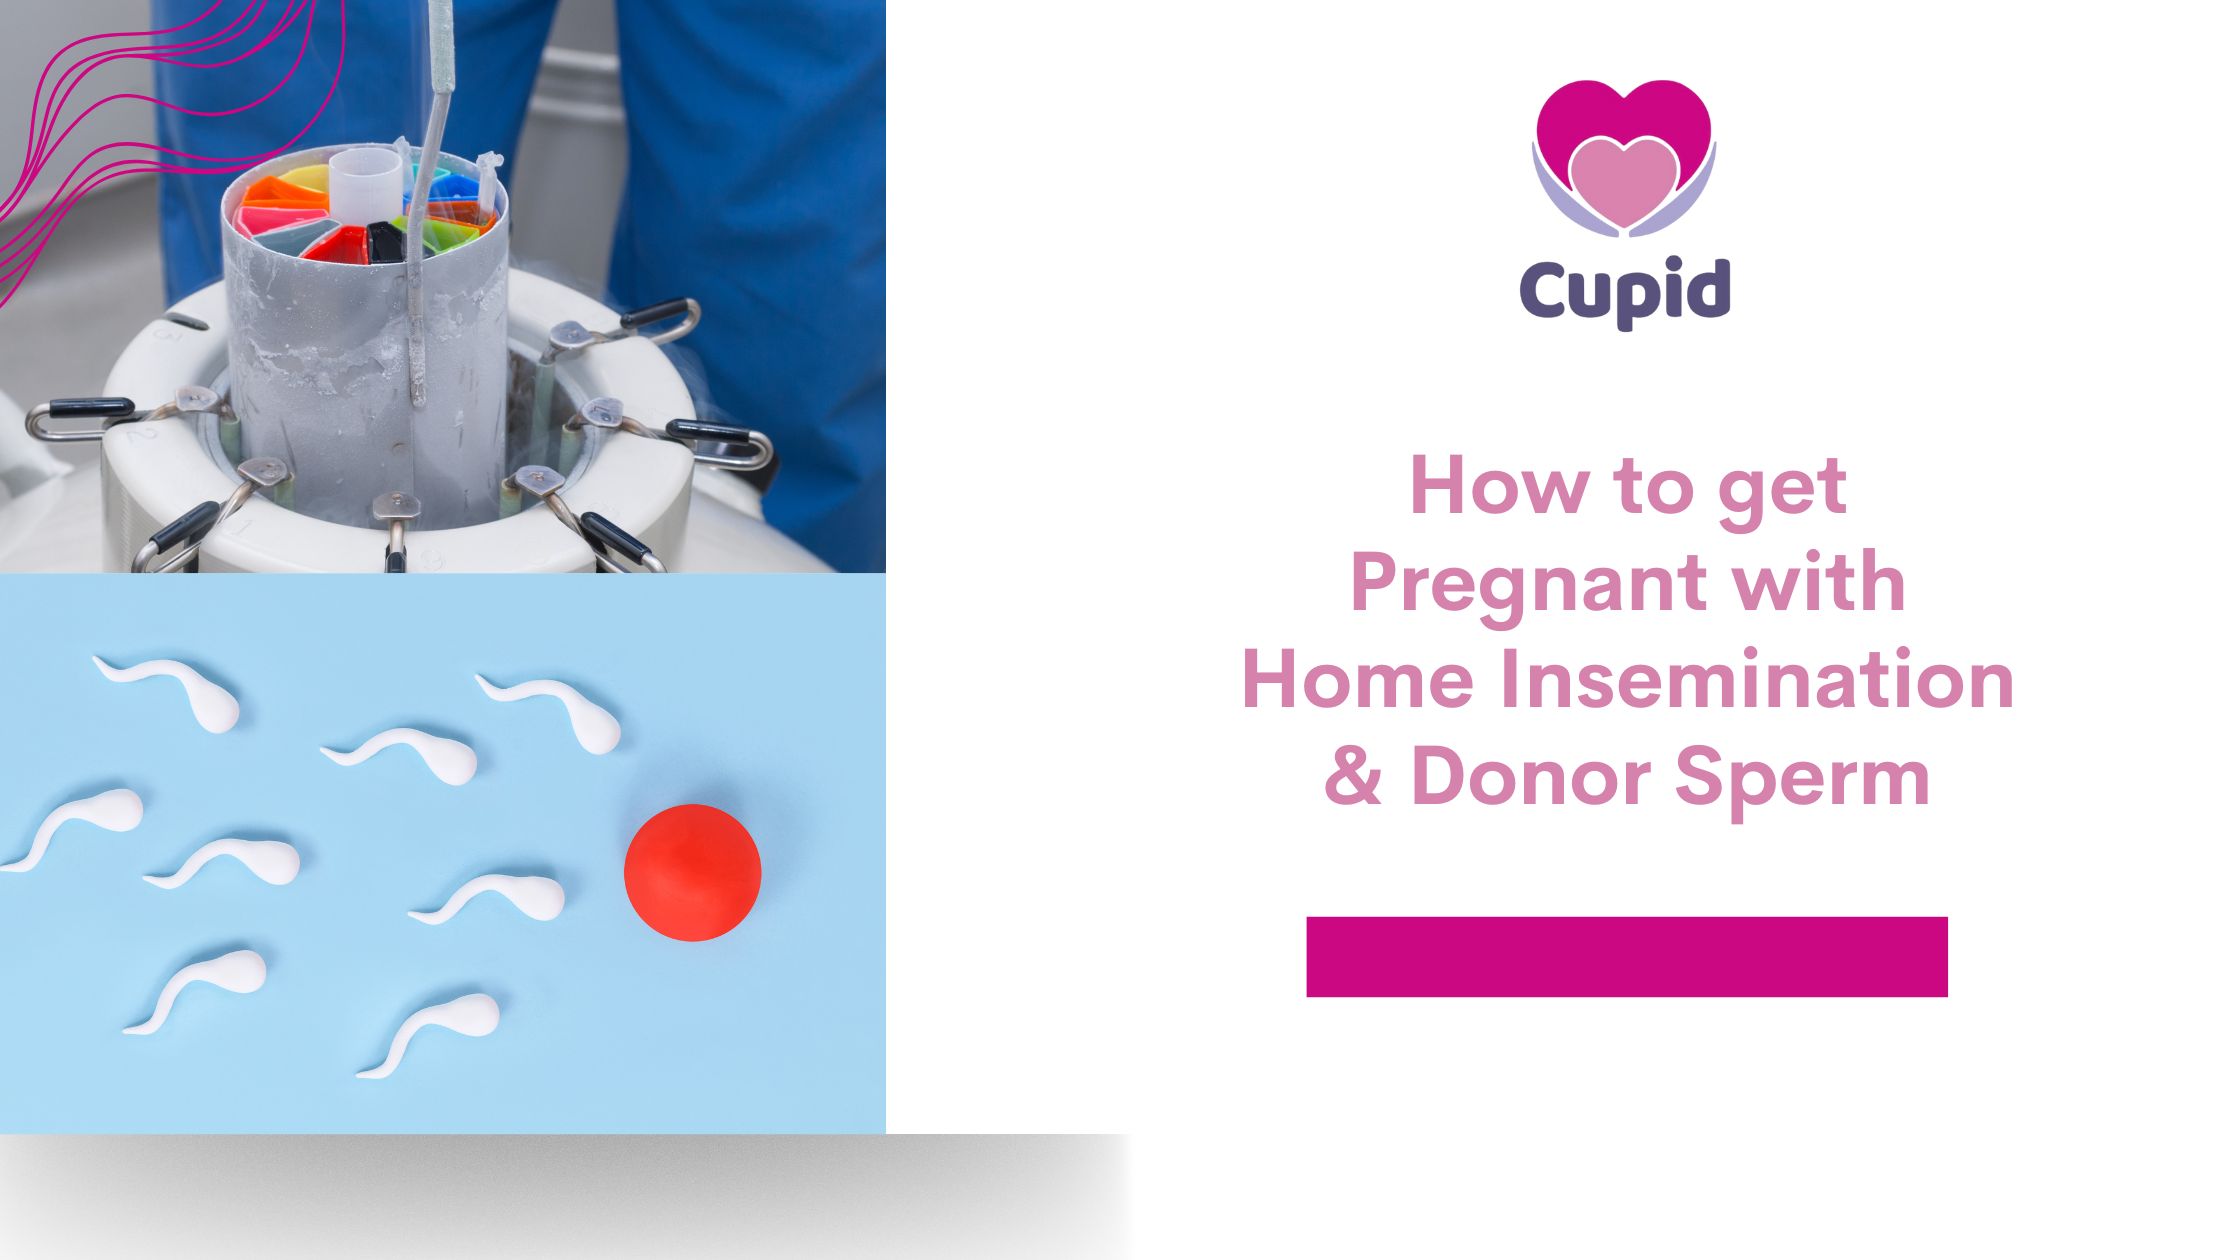 How to get Pregnant with at Home Insemination Using a Sperm Donor